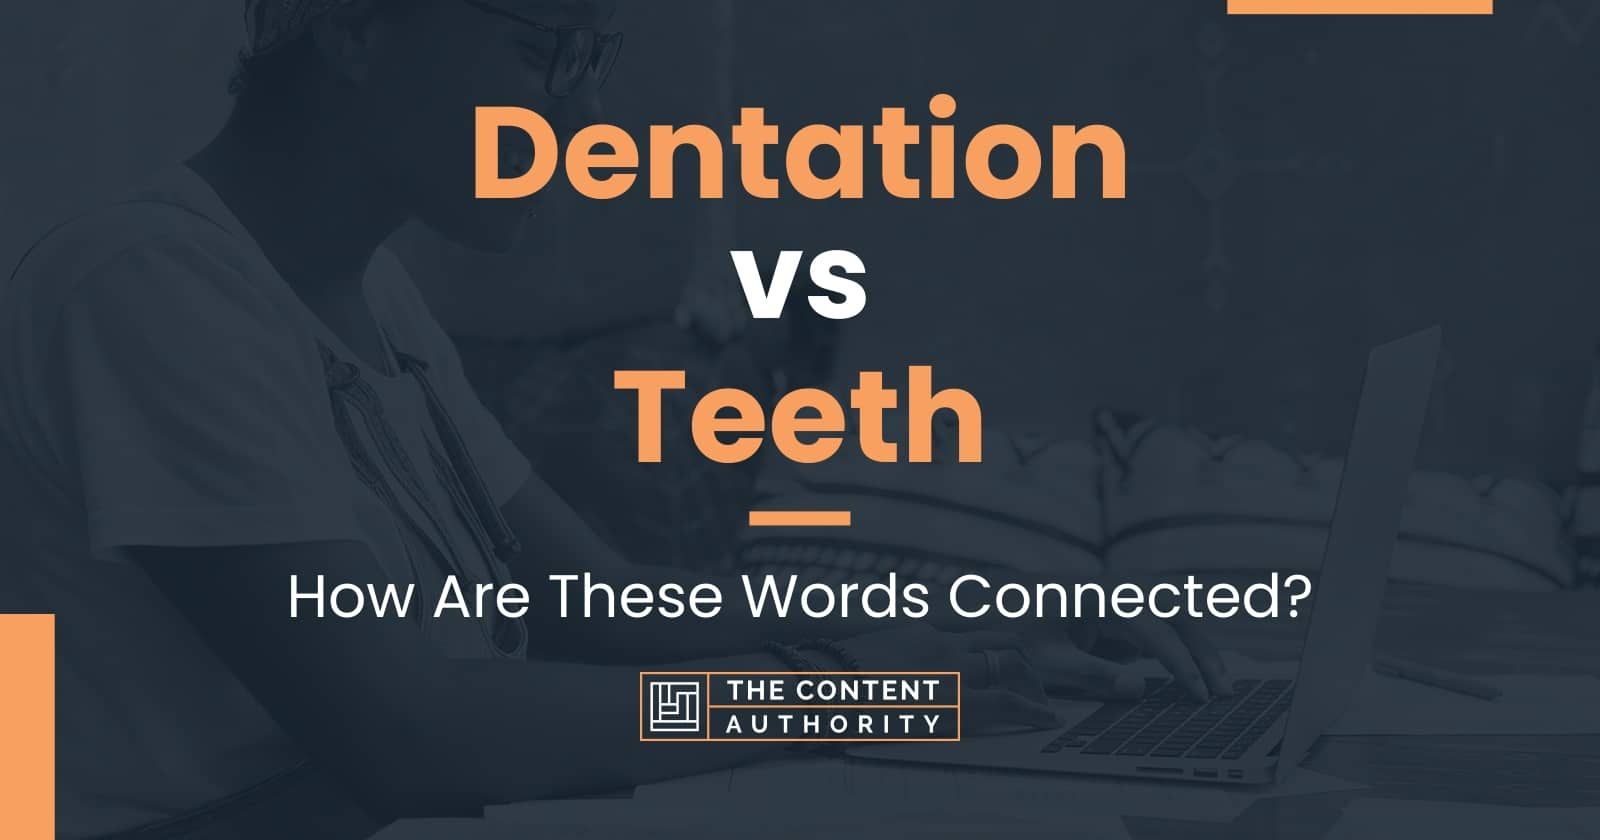 Dentation vs Teeth: Differences And Uses For Each One